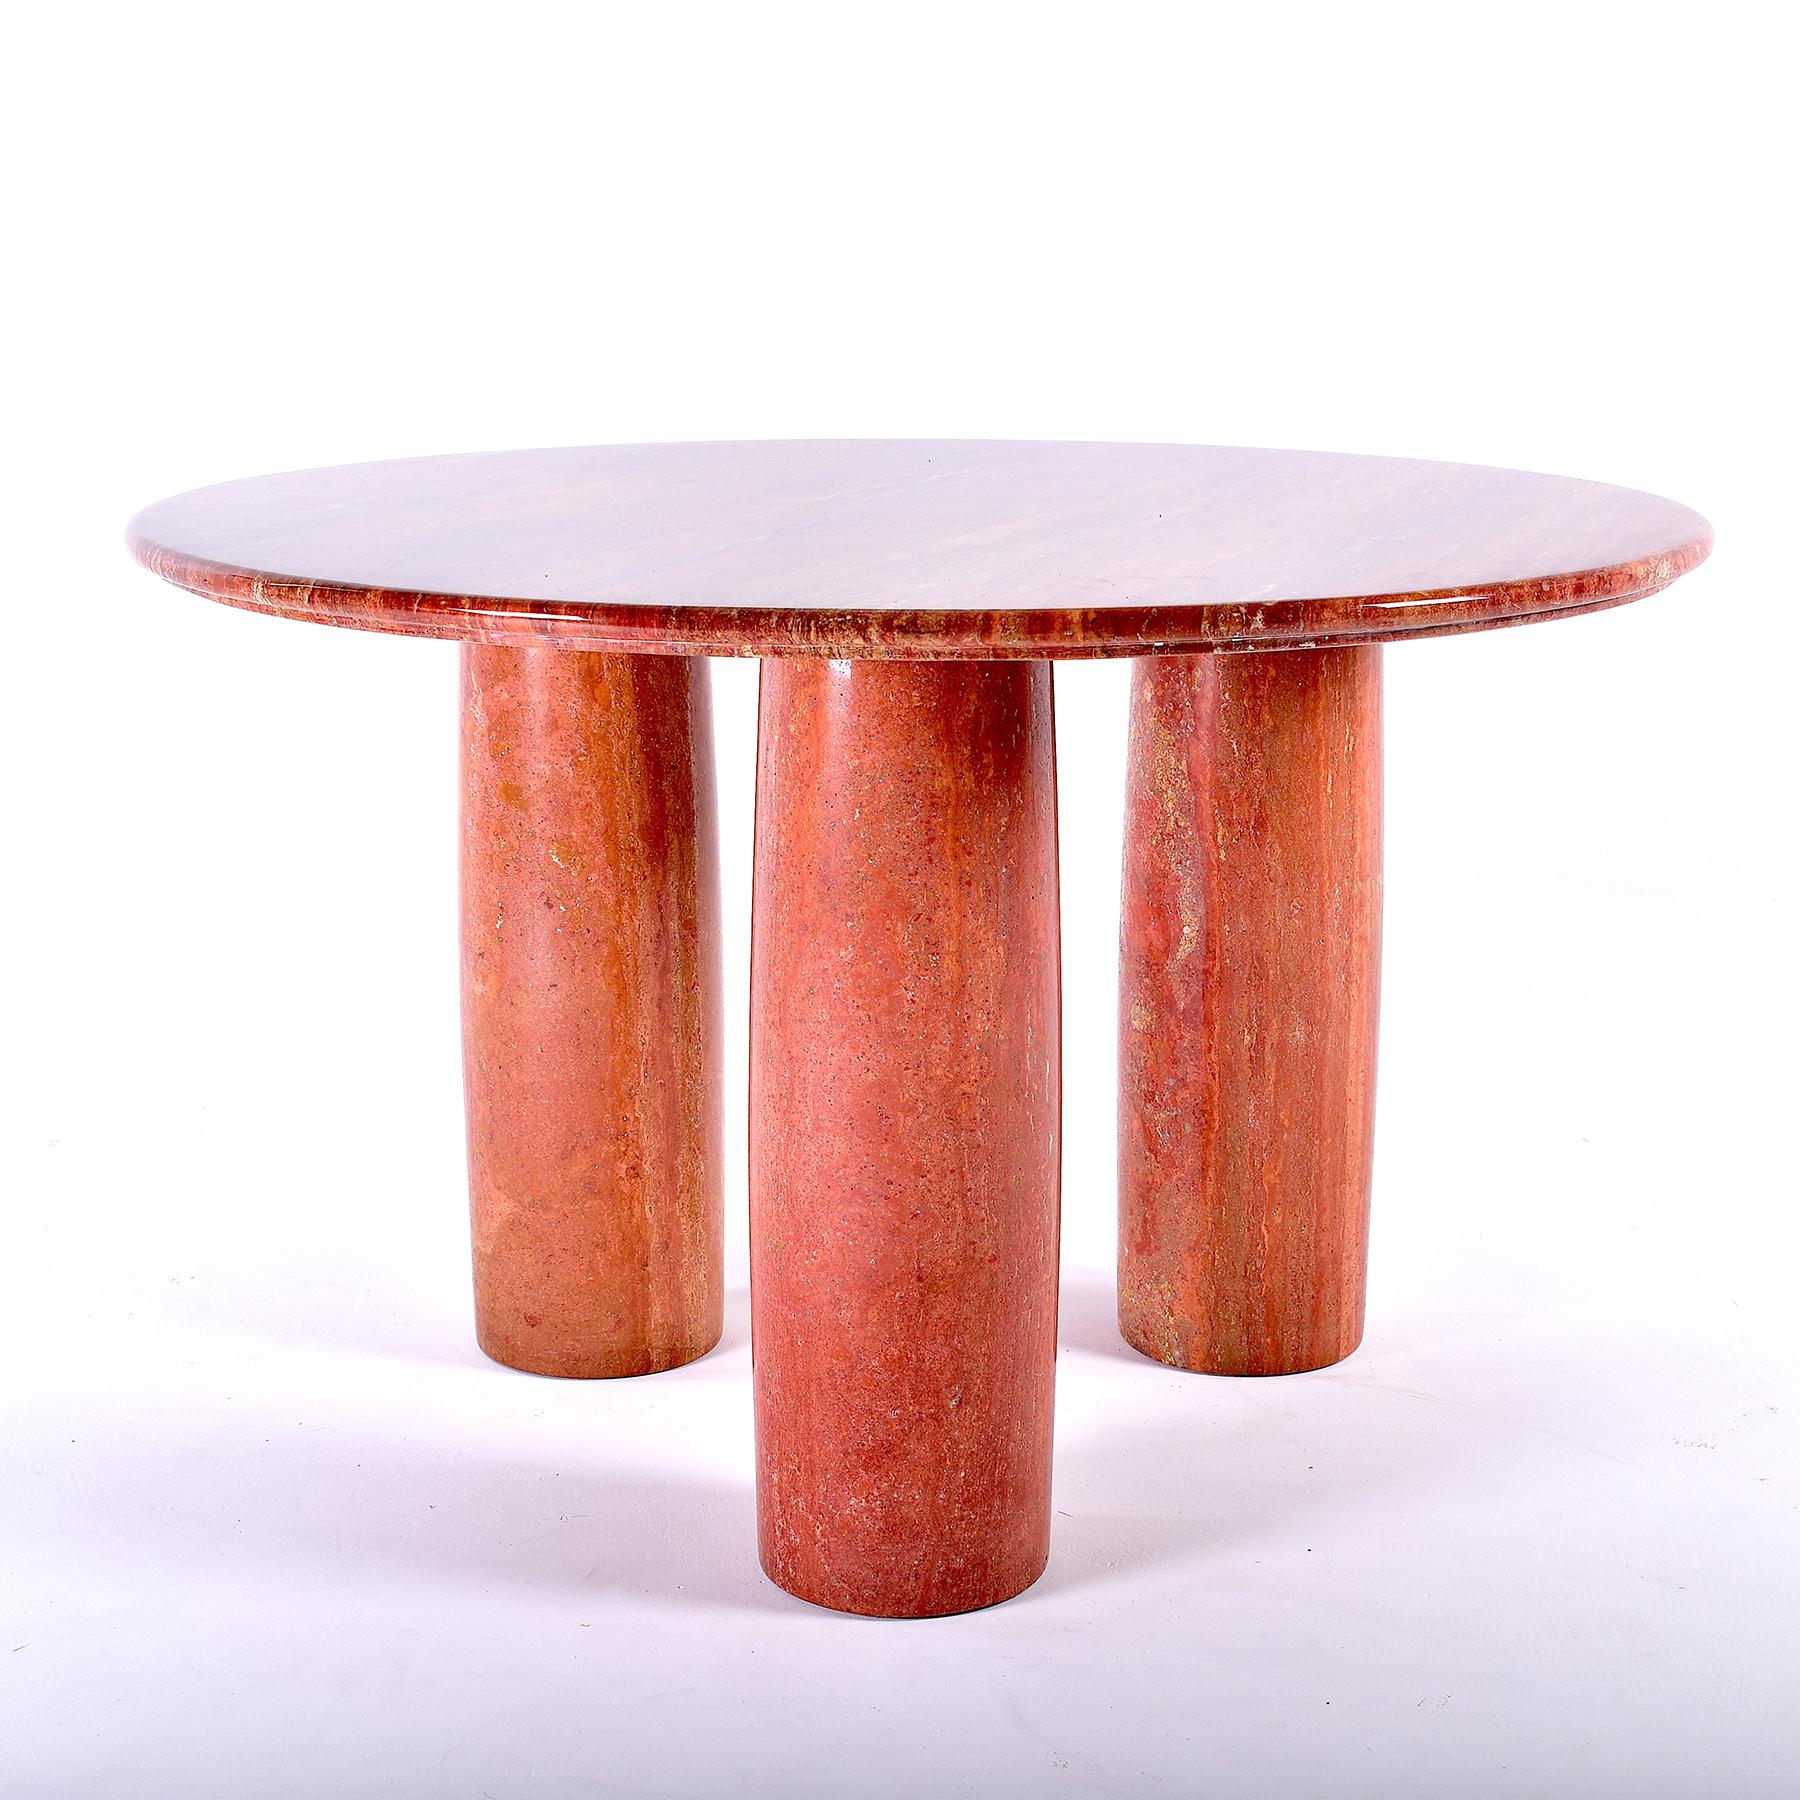 Round dining table on three legs, in massive red Persian travertine.
Designed by Mario Bellini for Cassina, Italy, in 1977.
Designer's concept: 